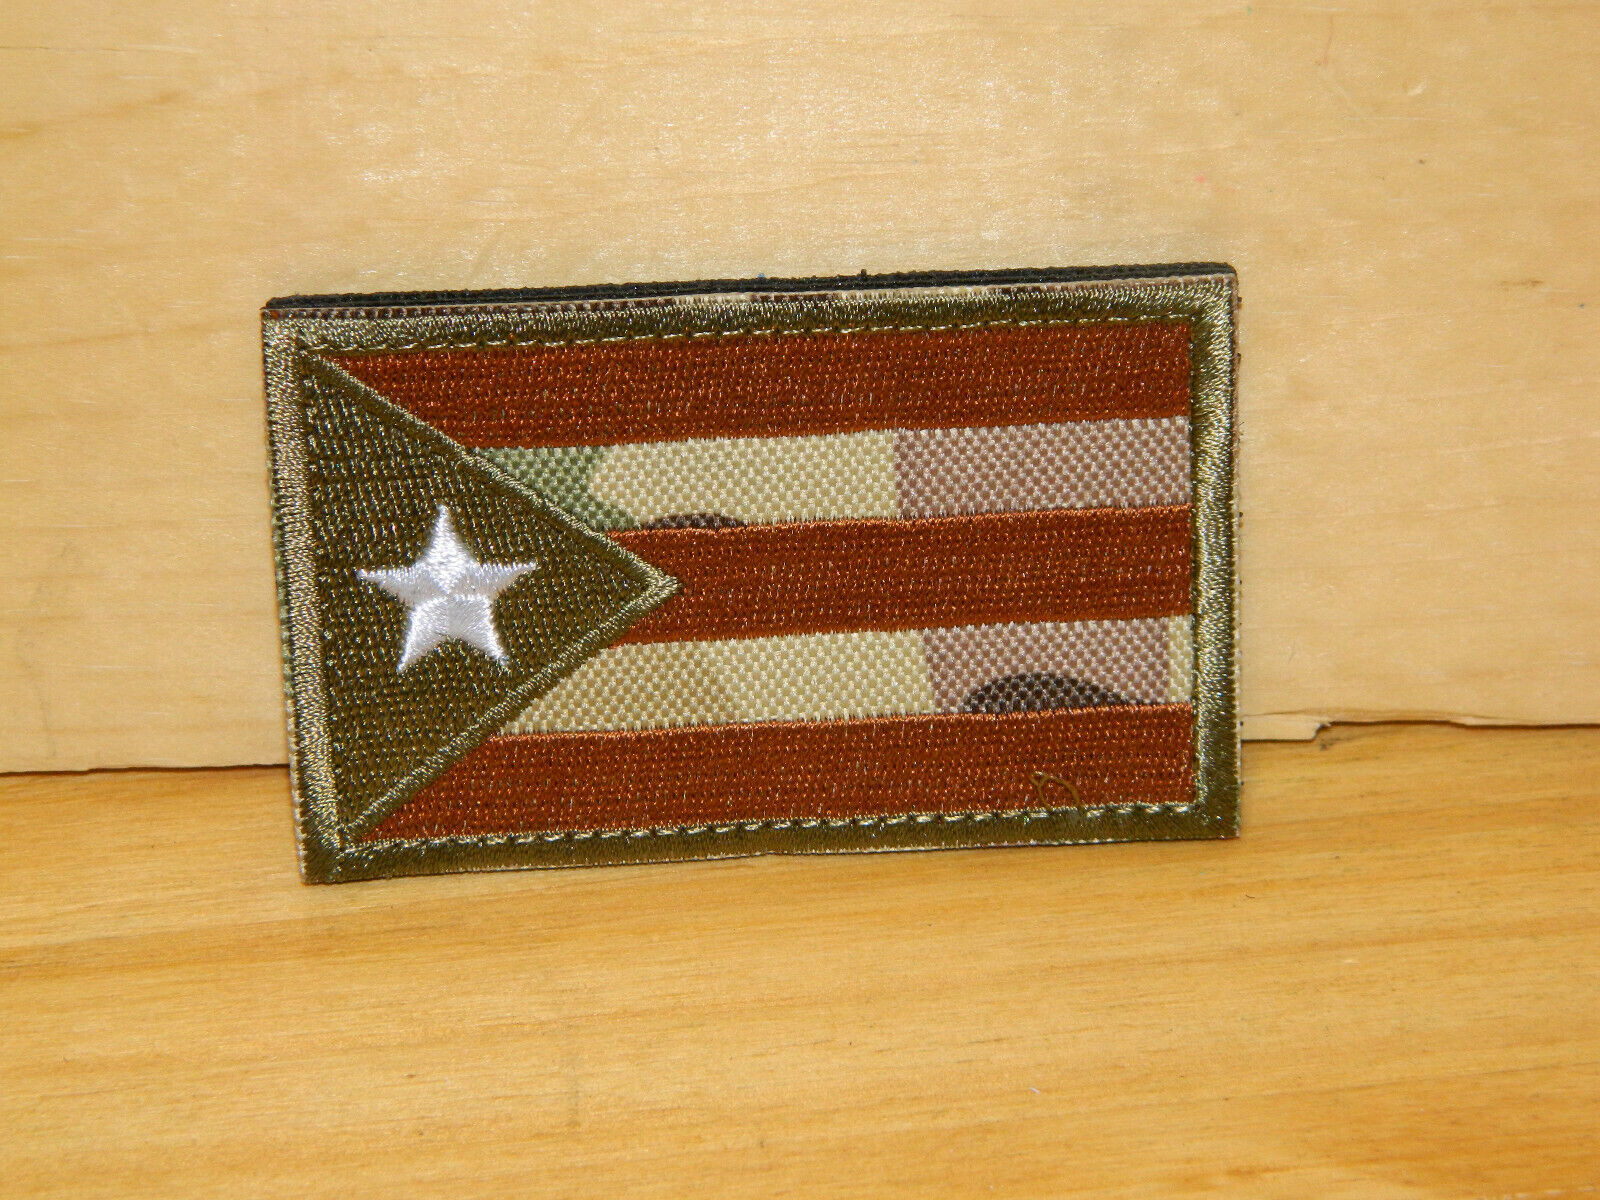 TWO (2) PUERTO RICO STATE FLAG PATCH NEW EMBROIDERED w/VELCROÂ® Brand Fastener 